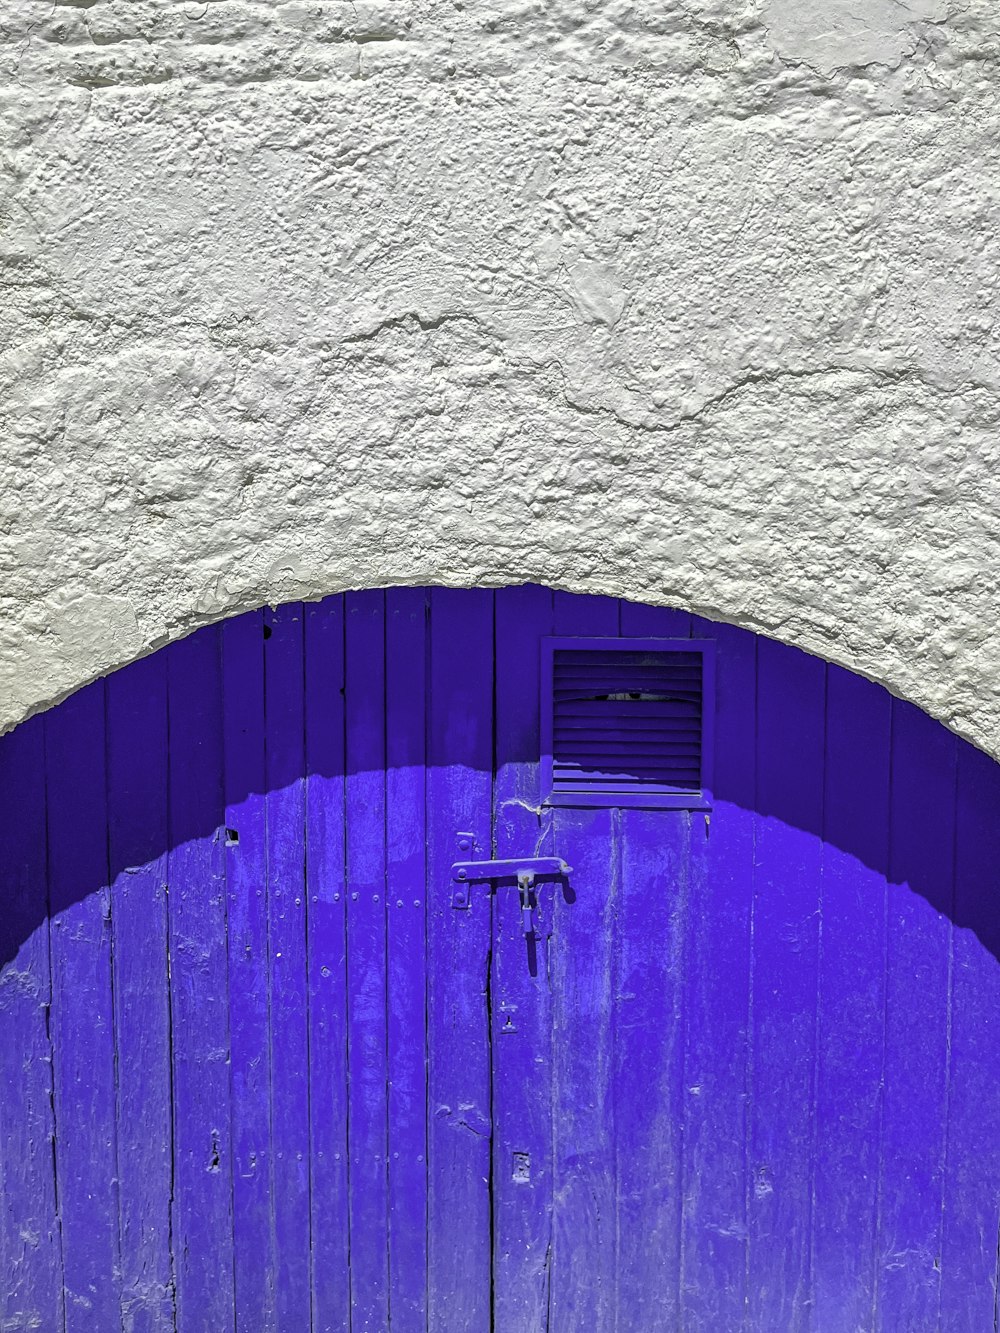 a cat sitting on a bench in front of a purple door